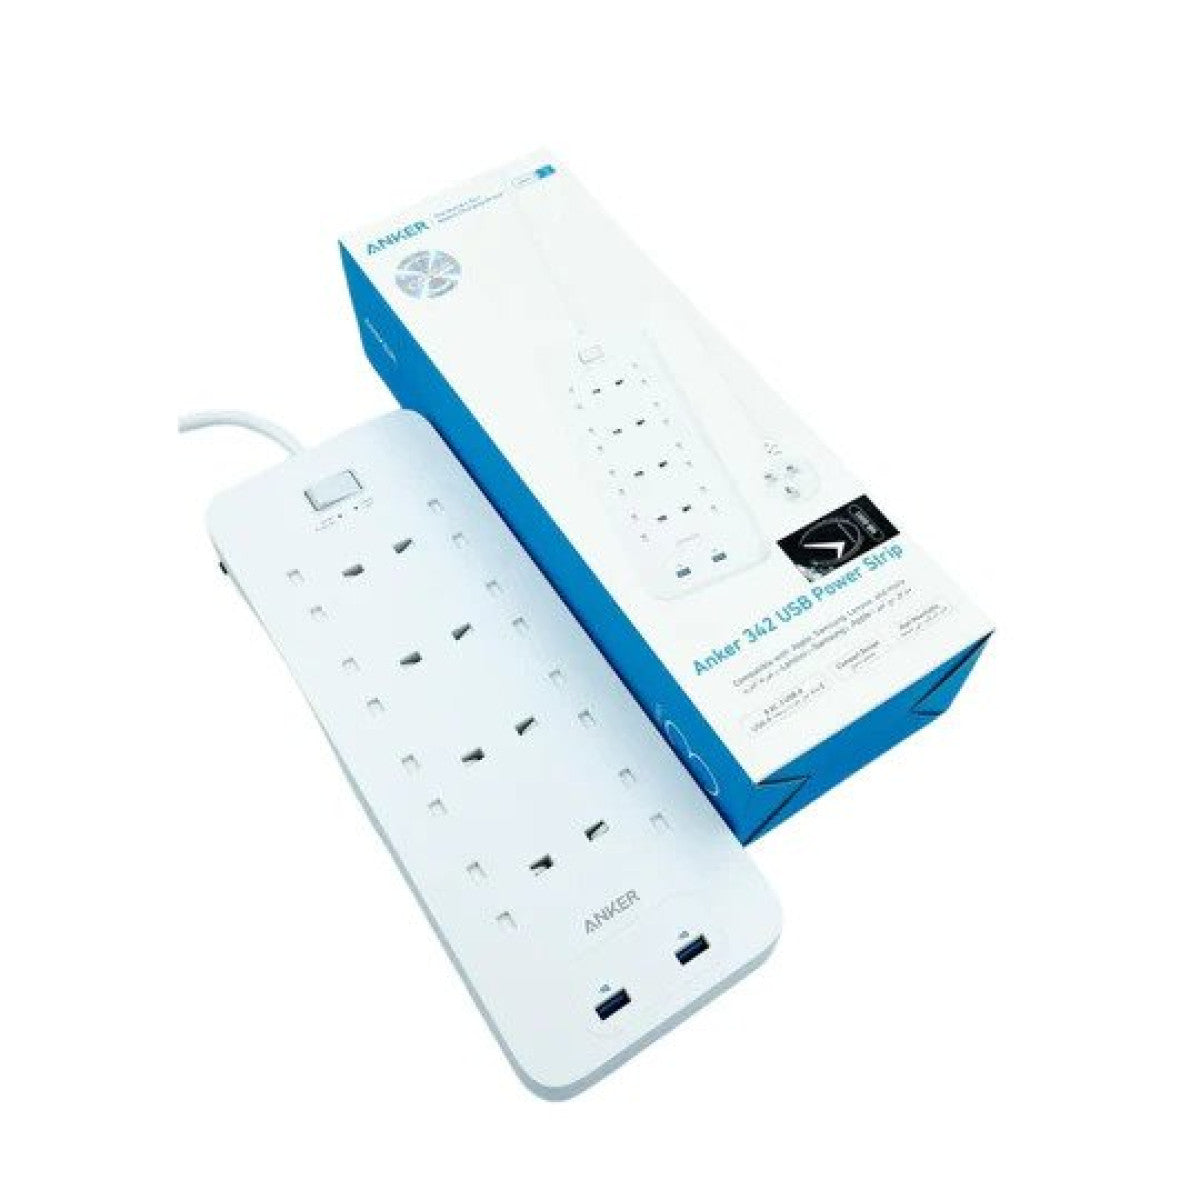 White power strip with multiple outlets and USB